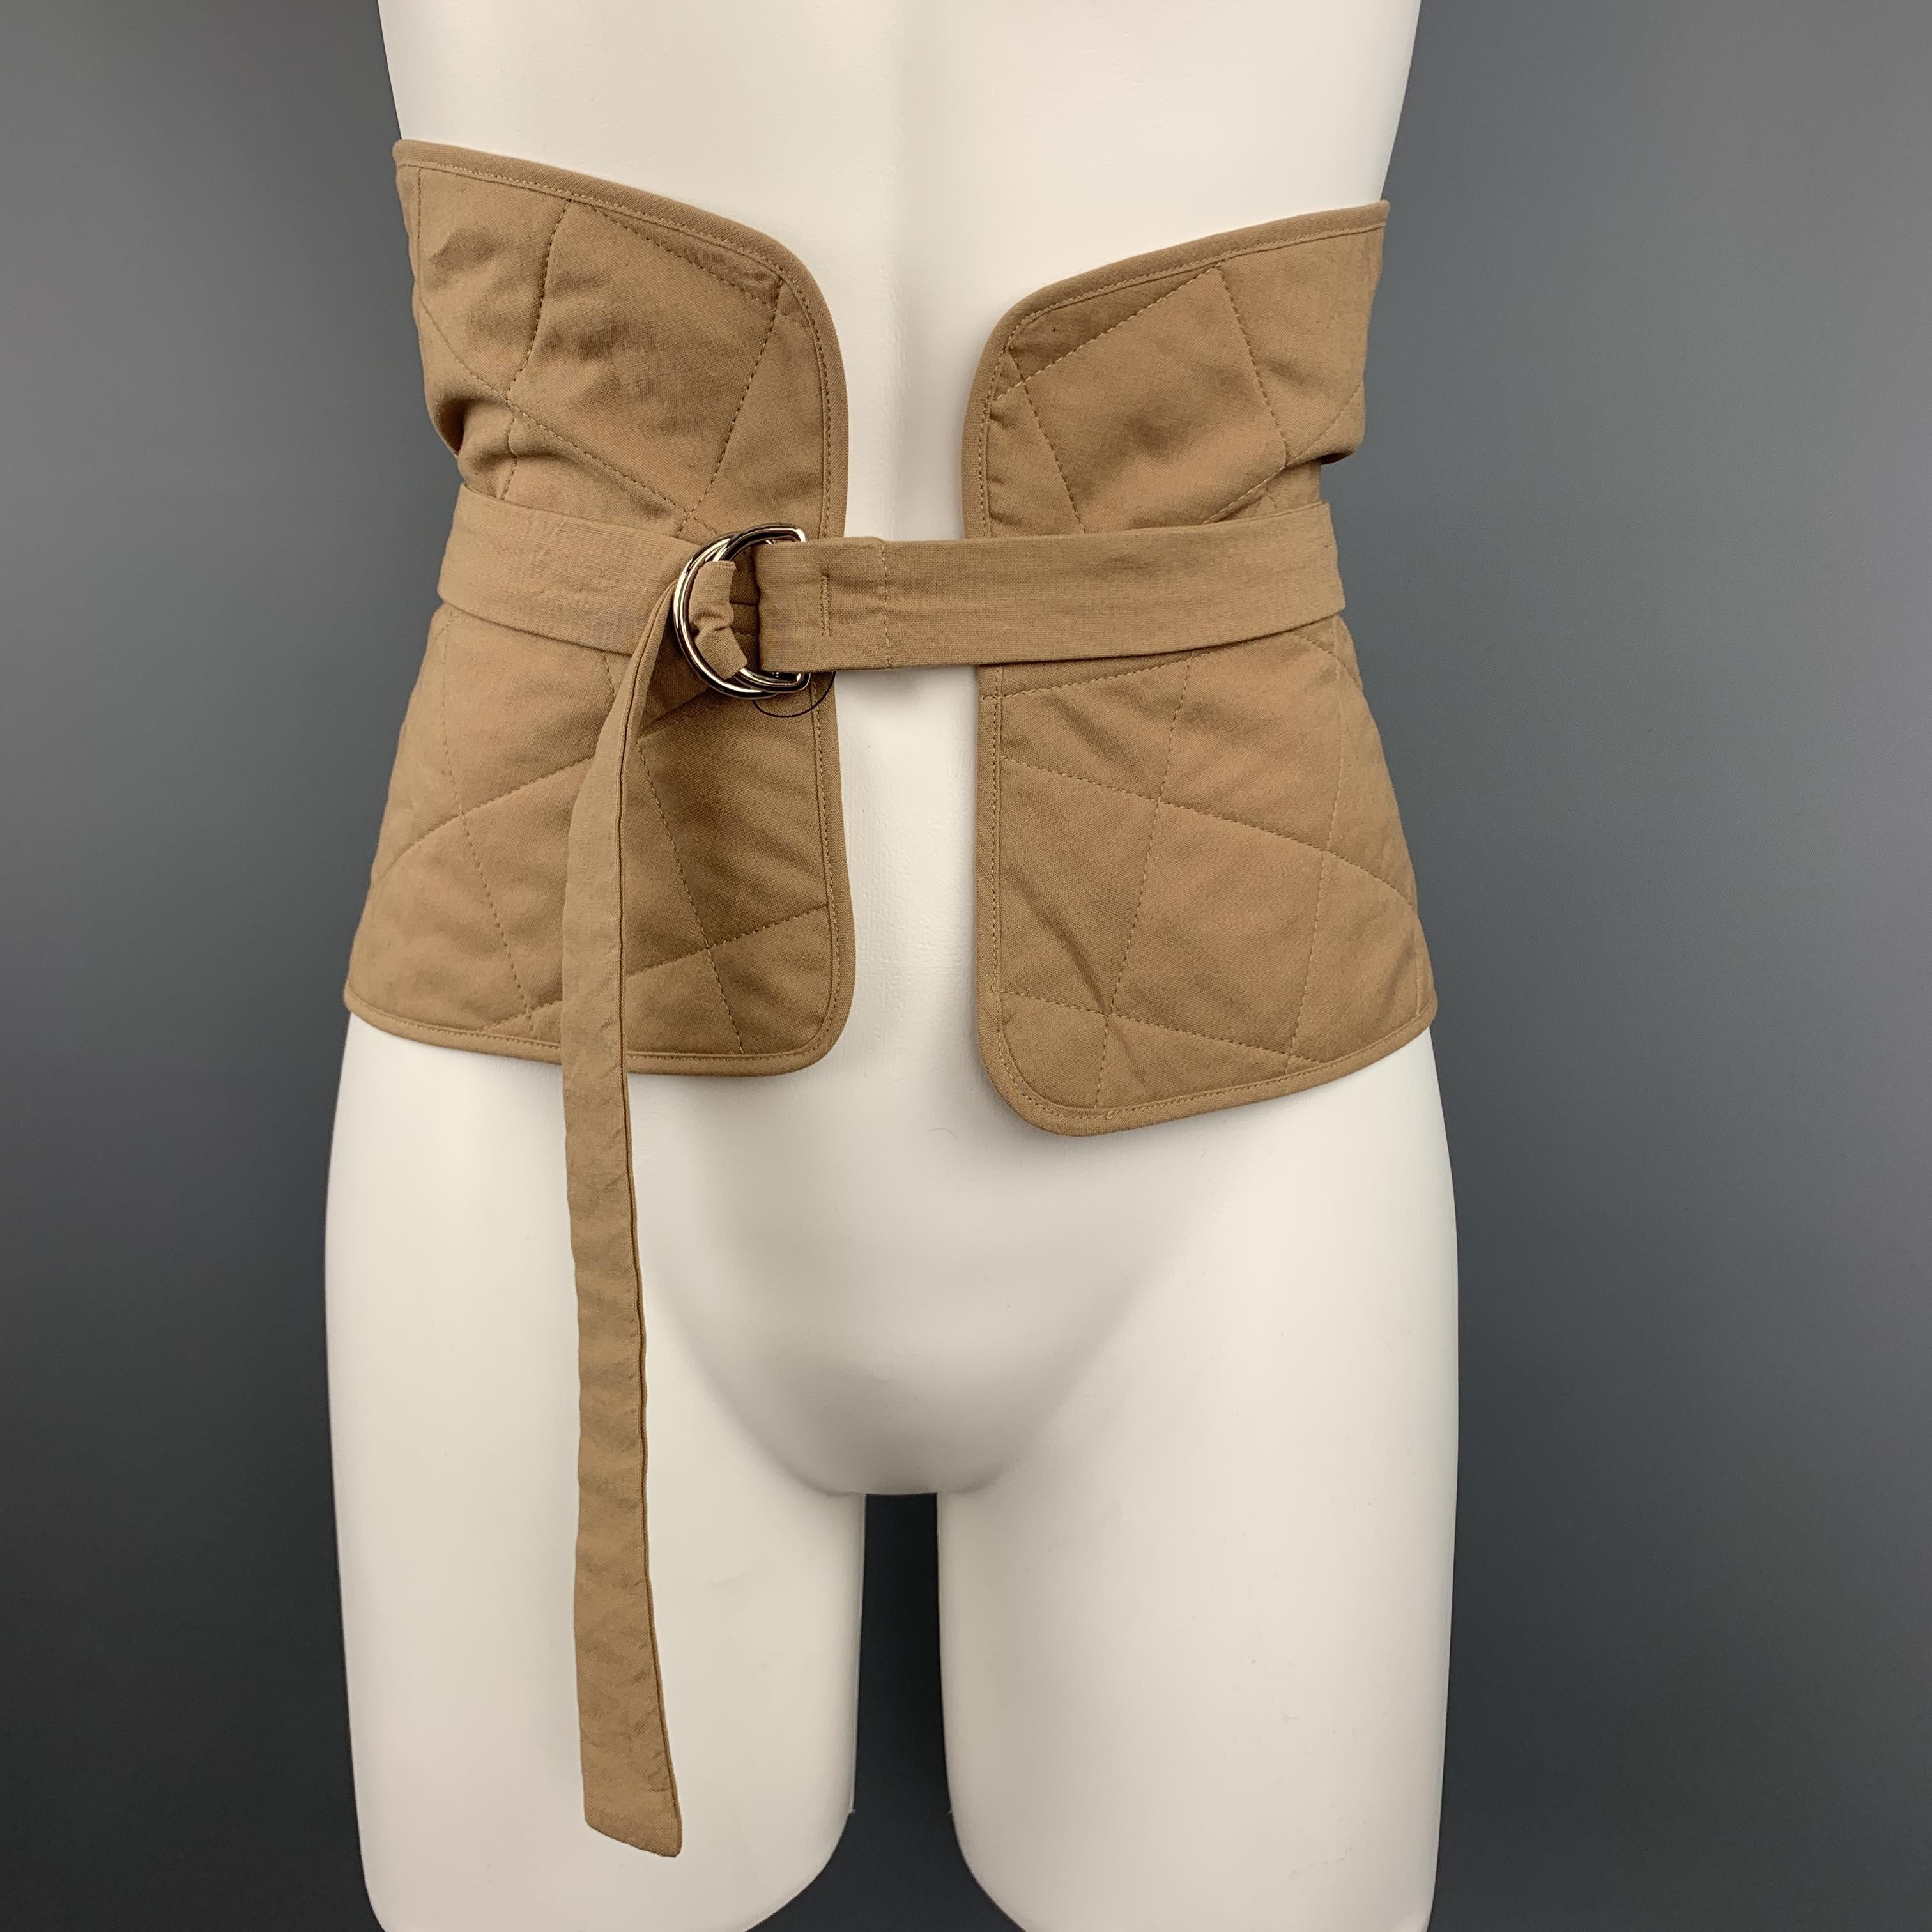 JIL SANDER Resort 2018 waist belt comes features a thick quilted cotton canvas band with adjustable belt overlay with D loop closures. Made in Italy.

New with Tags.
Marked: IT 42
Original Retail Price: $460.00

Measurements:

Length: 45 in.
Width: